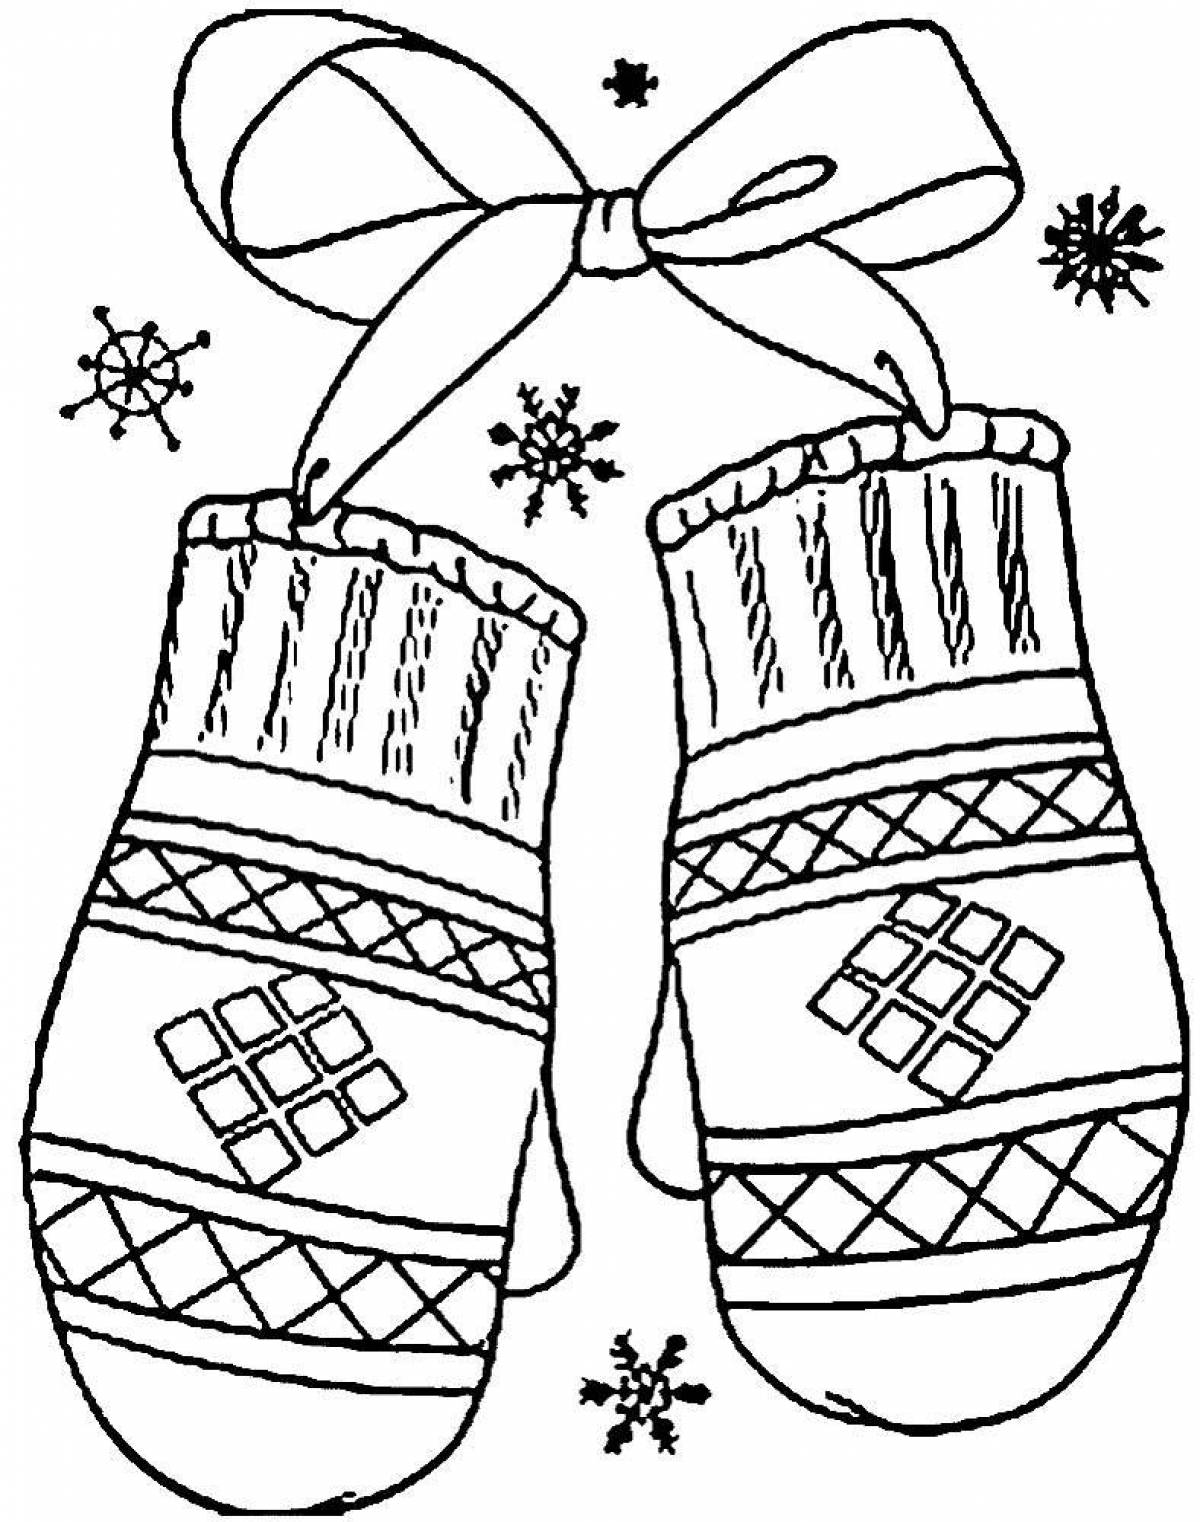 Coloring book peaceful mitten for children 3-4 years old